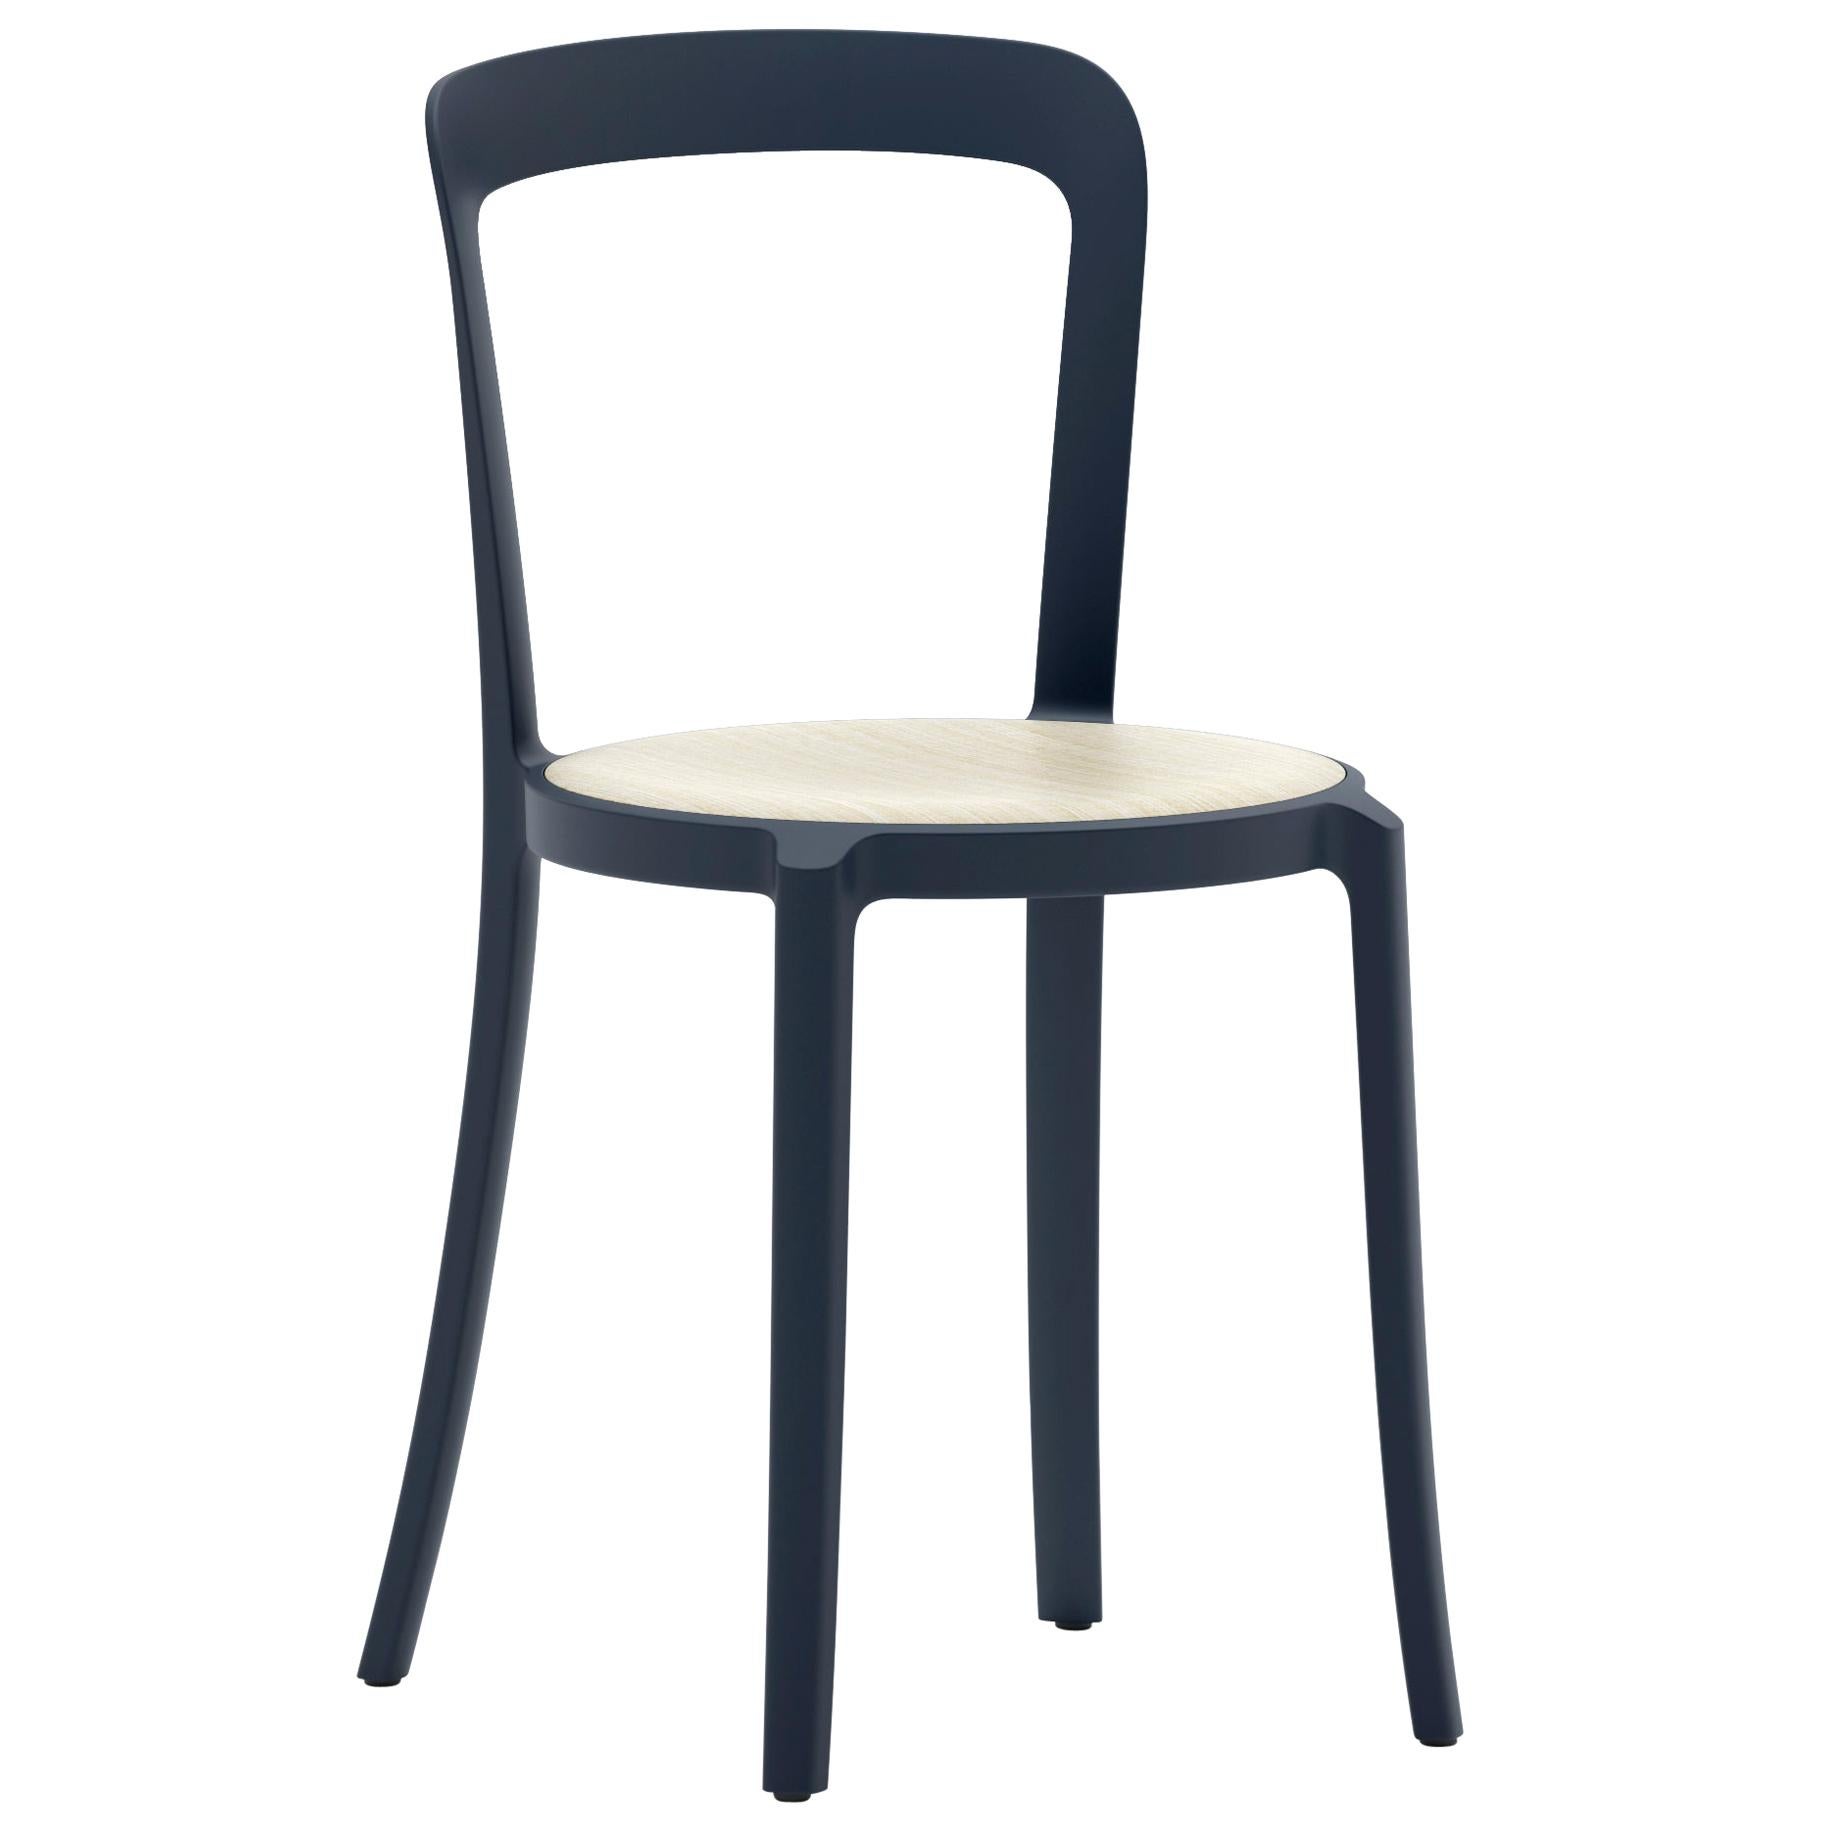 Emeco On & On Stacking Chair in Dark Blue with Ash seat by Barber & Osgerby For Sale